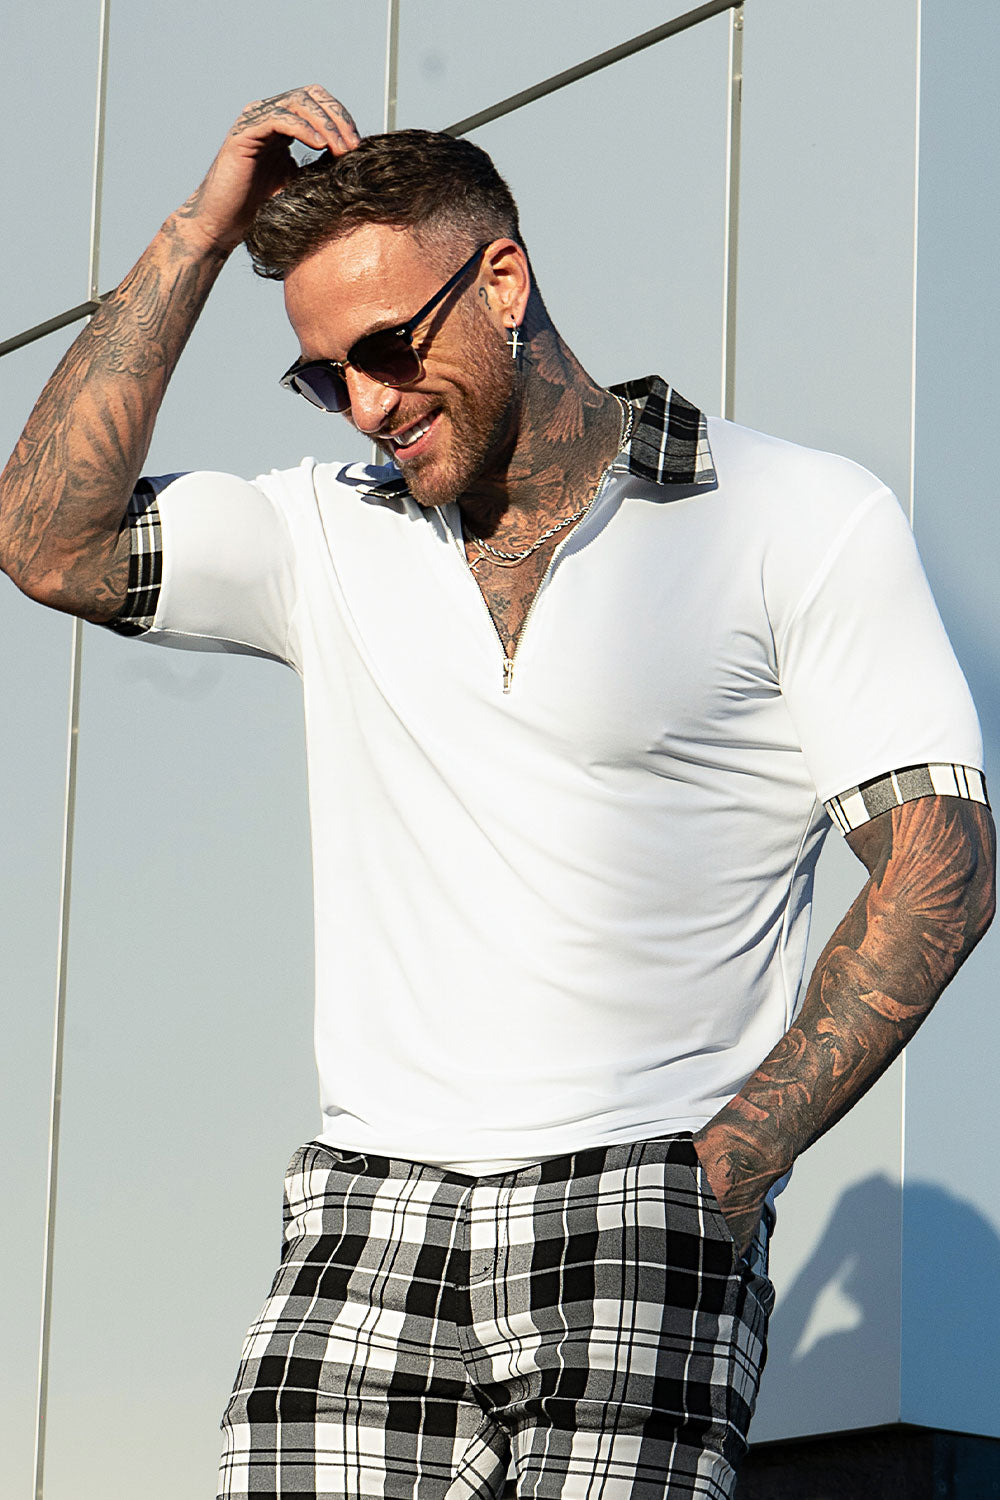 best polo shirts for work - white & plaid